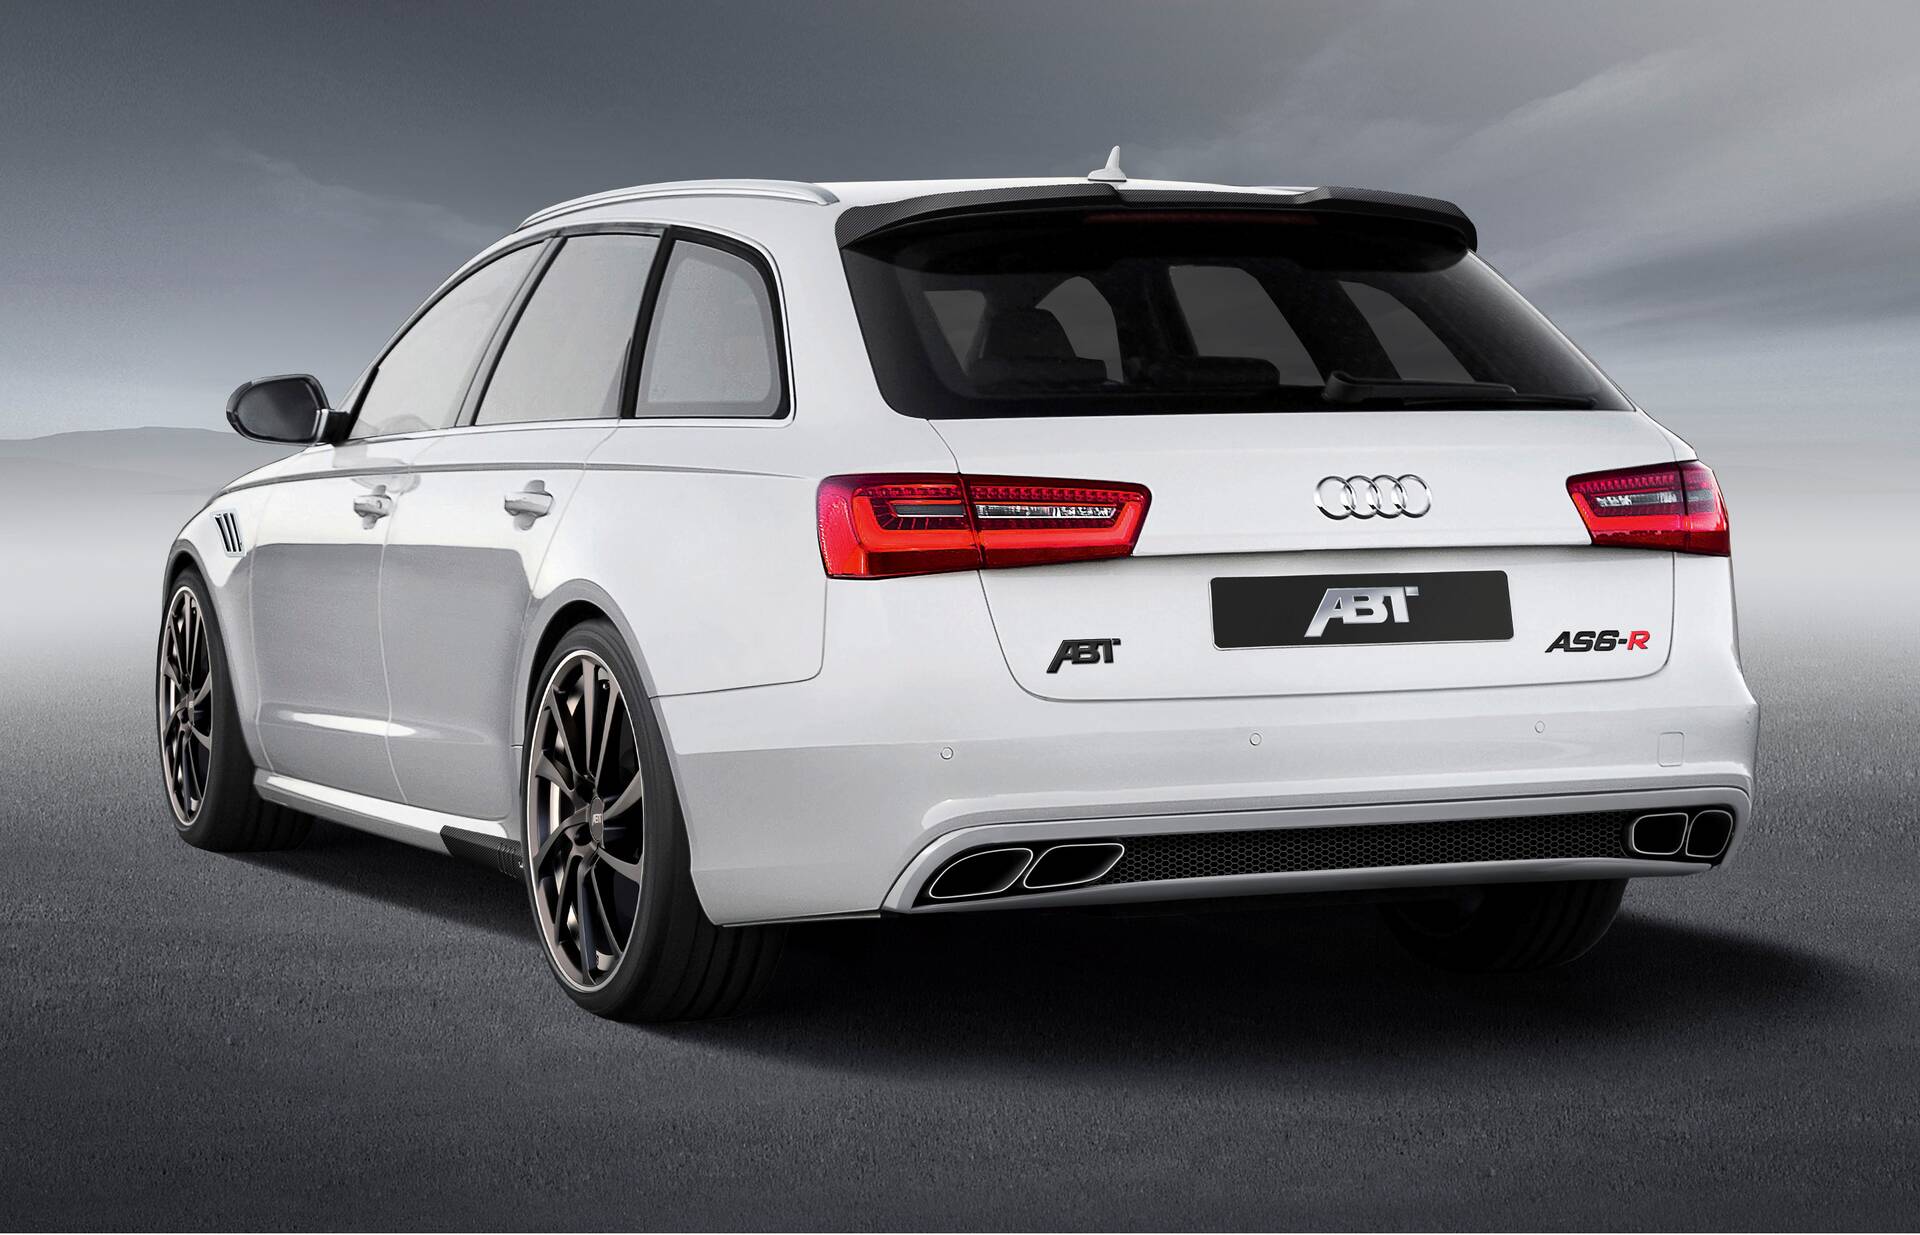 Press releases - Audi Tuning, VW Tuning, Chiptuning von ABT